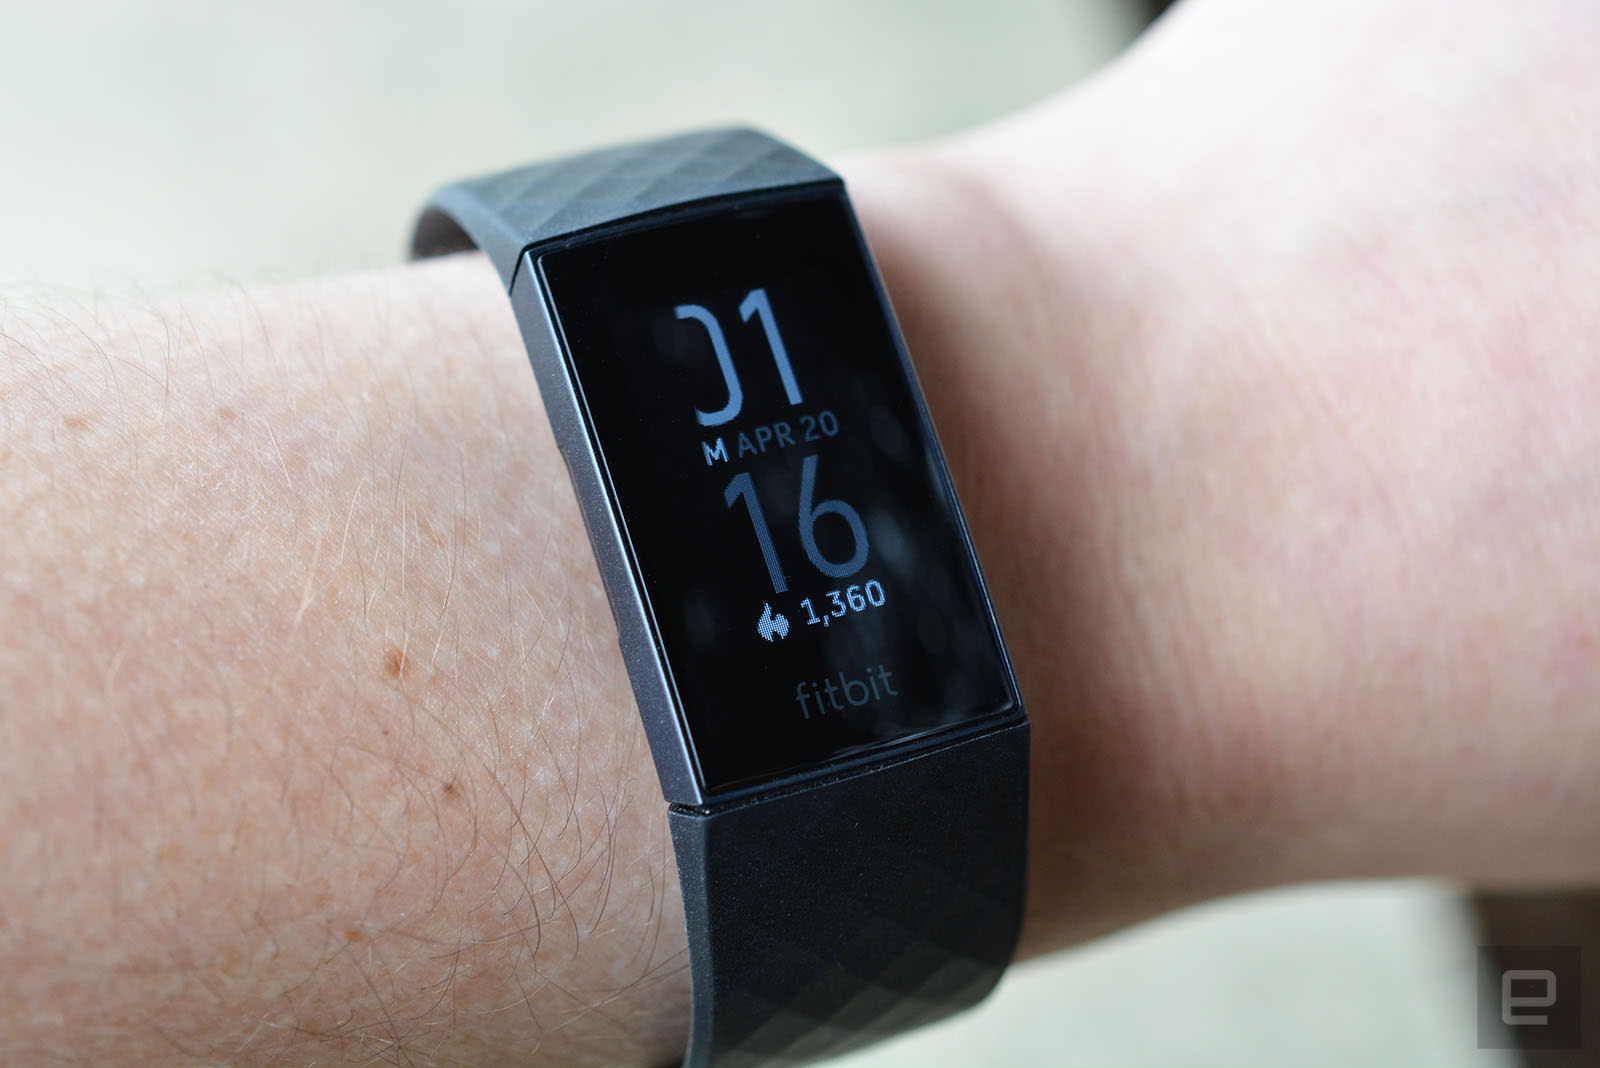 Fitbit’s Charge 4 band can now display blood oxygen saturation levels